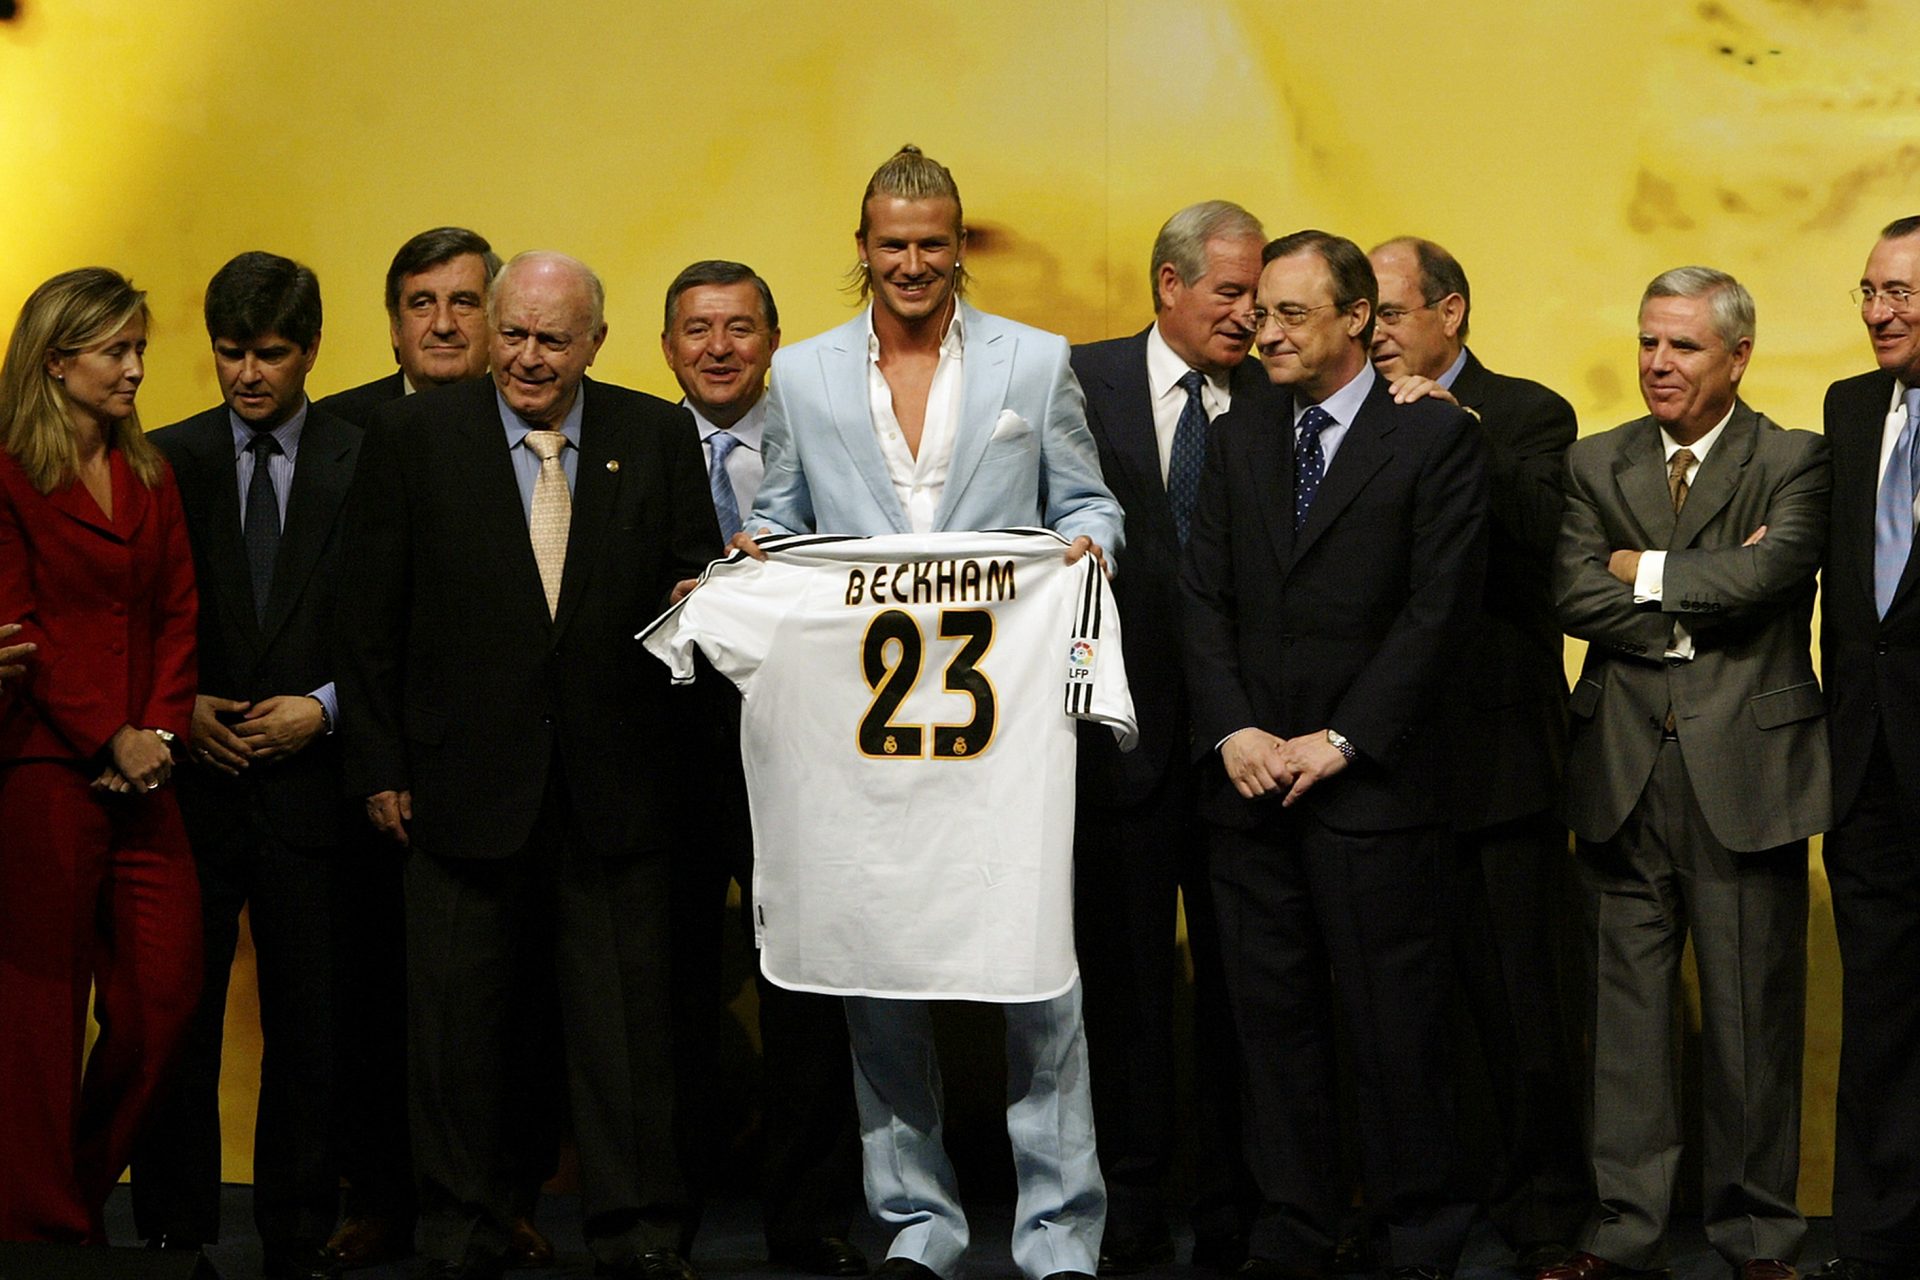 Did David Beckham’s transfer to Real Madrid cause the Messi and Ronaldo GOAT debate?